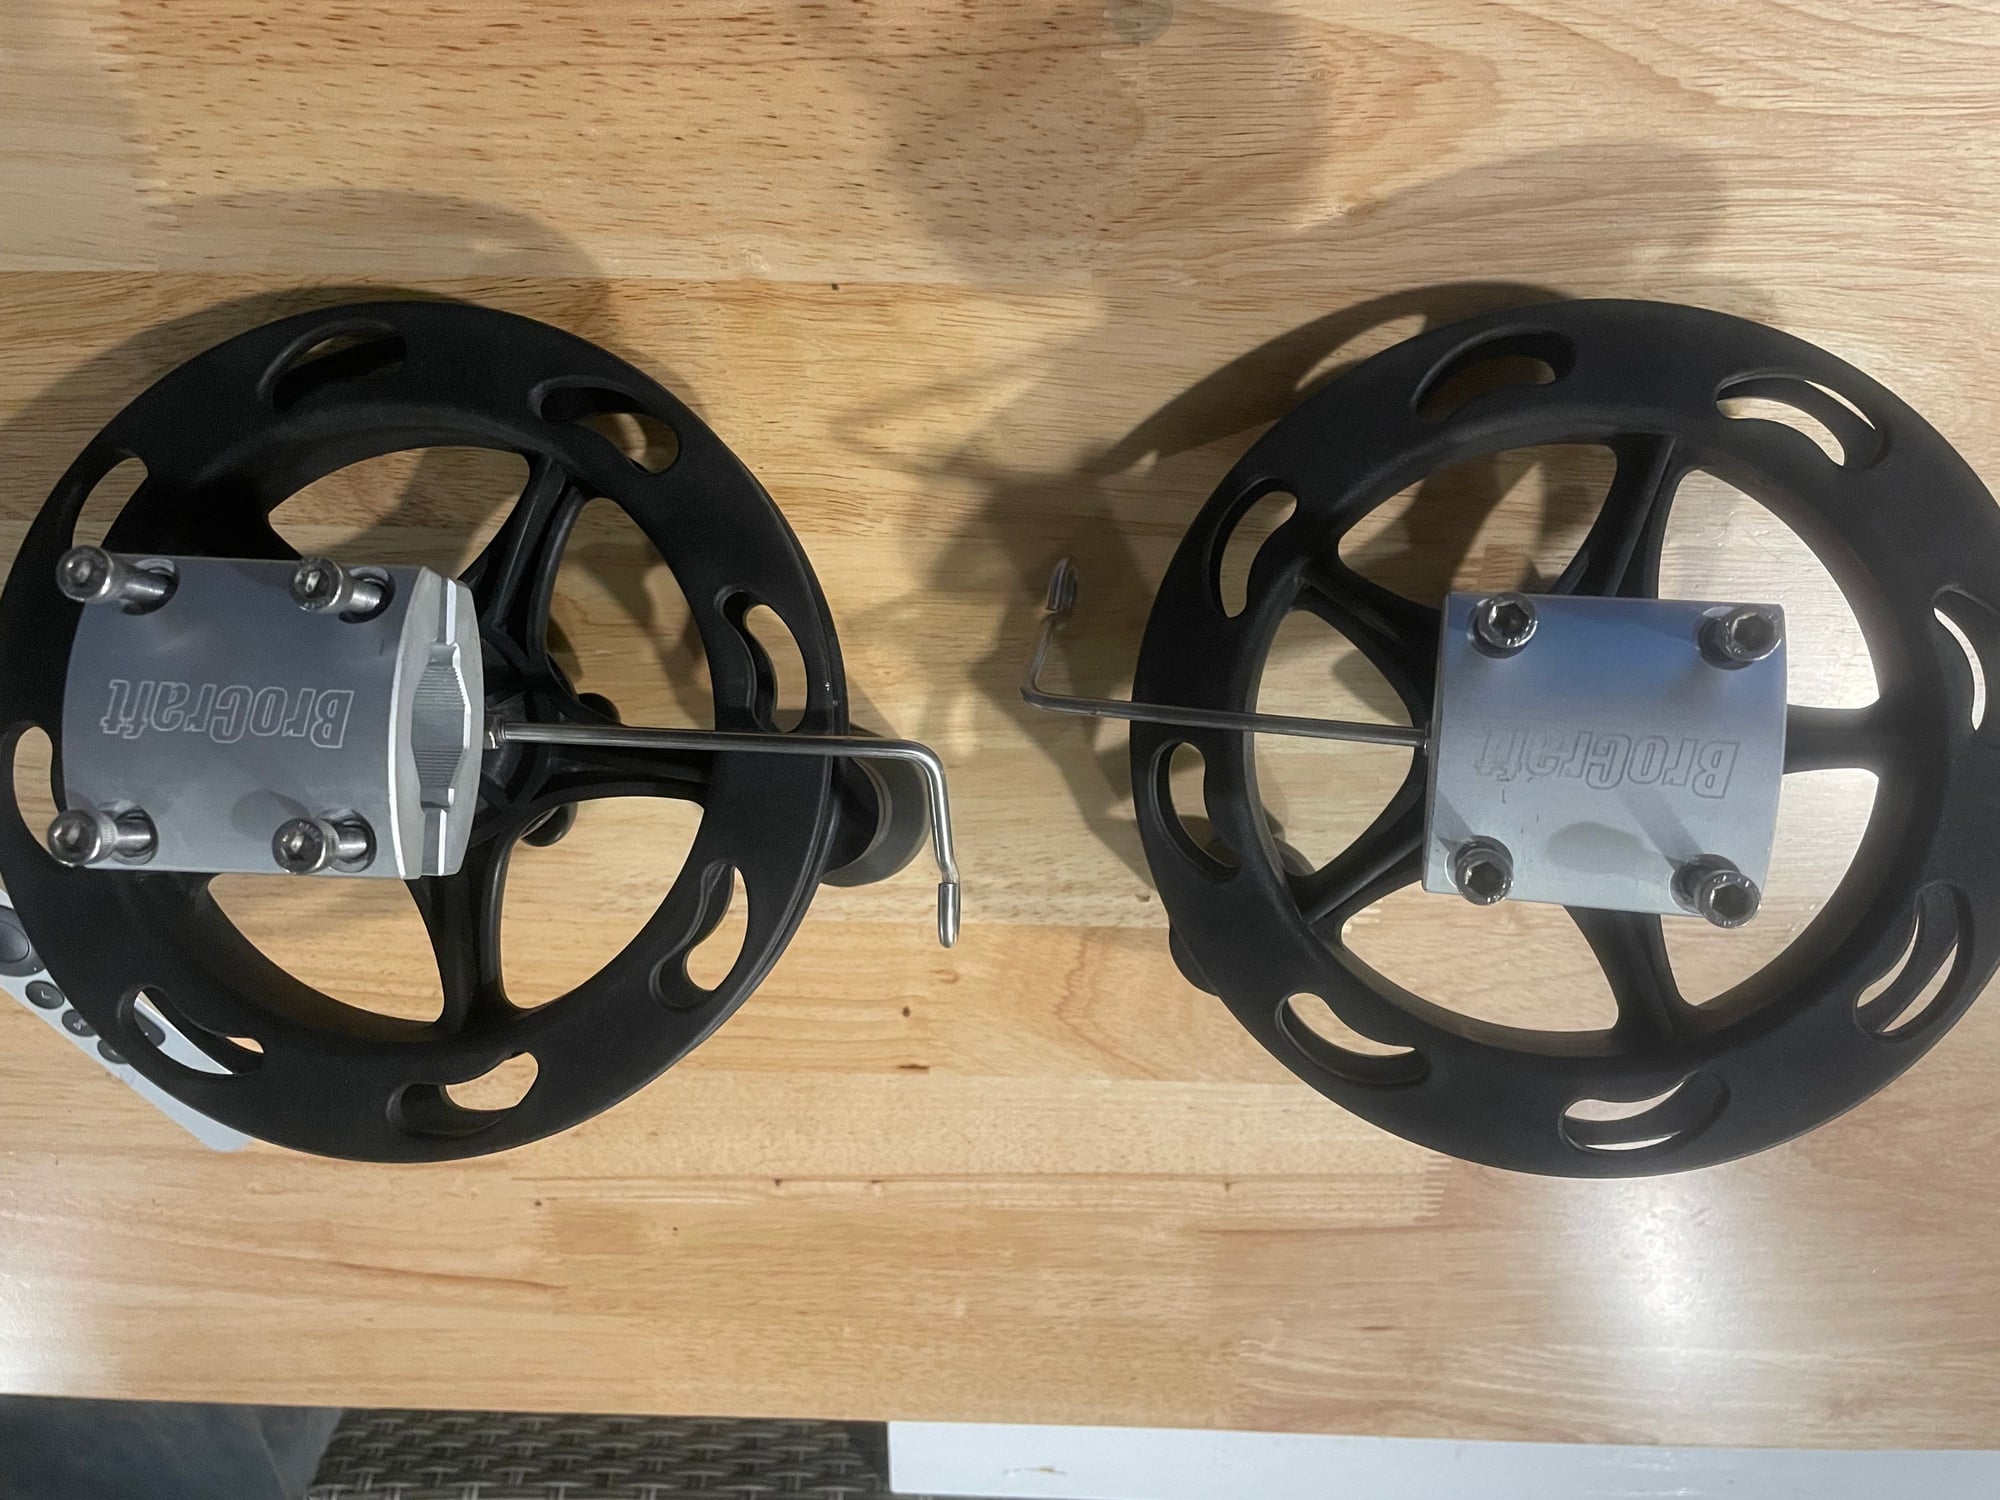 WTS: Brocraft Teaser Reels - The Hull Truth - Boating and Fishing